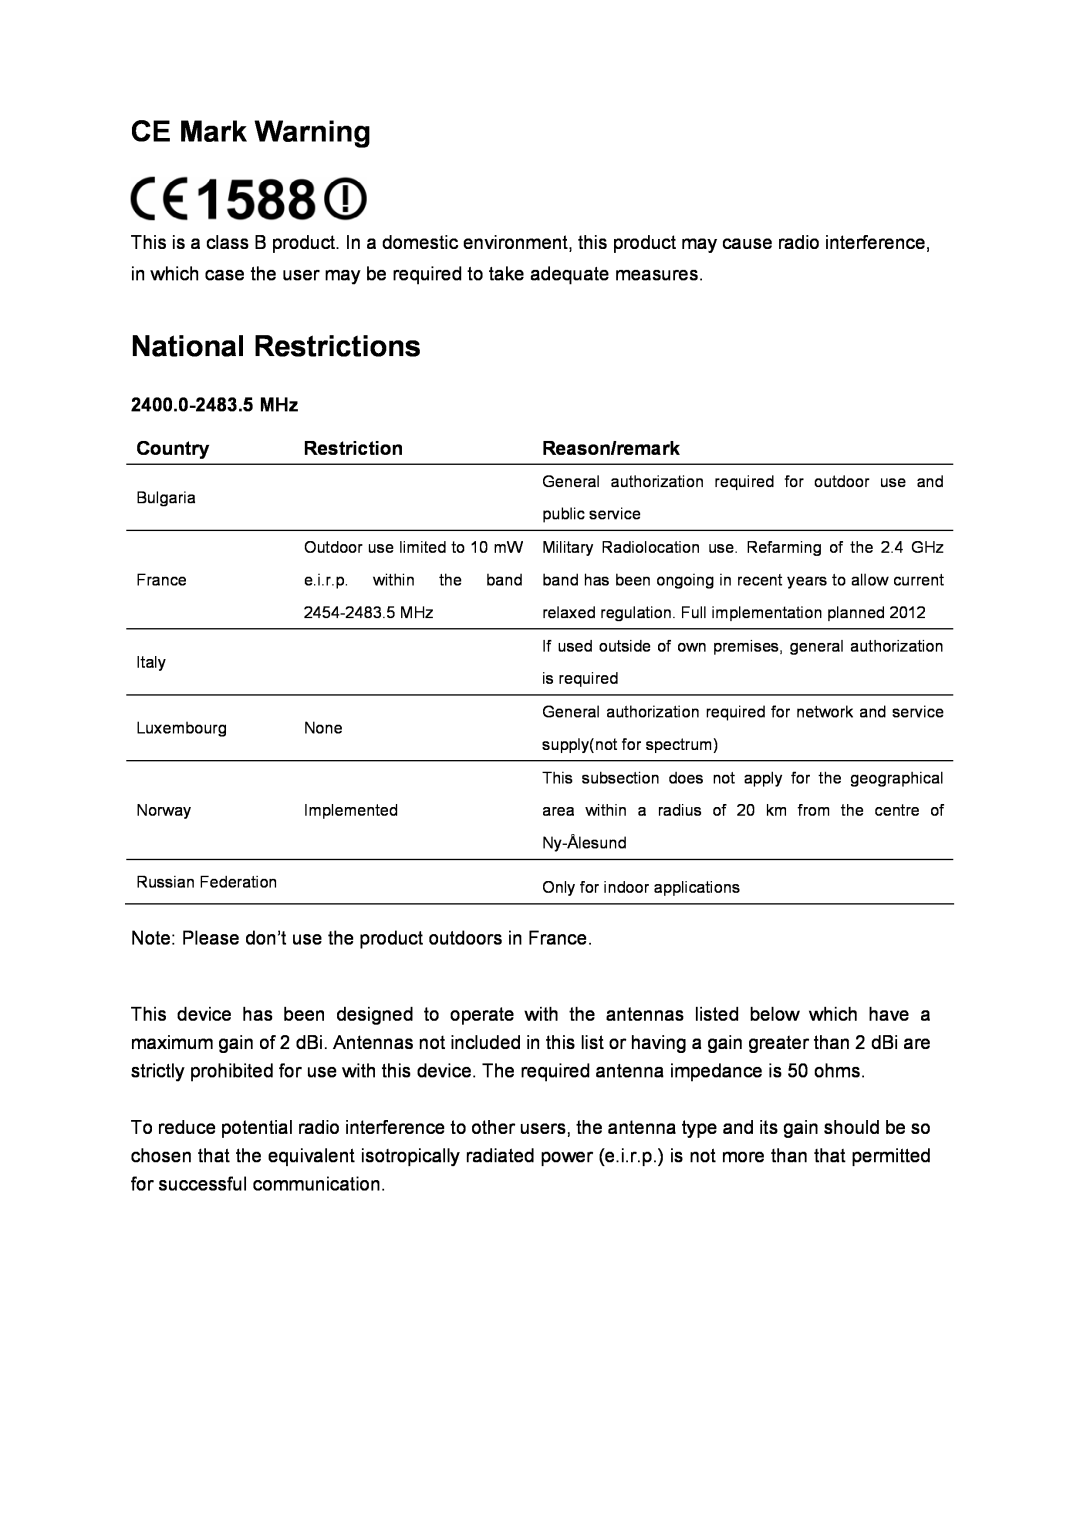 TP-Link TL-WN851ND manual CE Mark Warning, National Restrictions, 2400.0-2483.5 MHz, Country, Reason/remark 